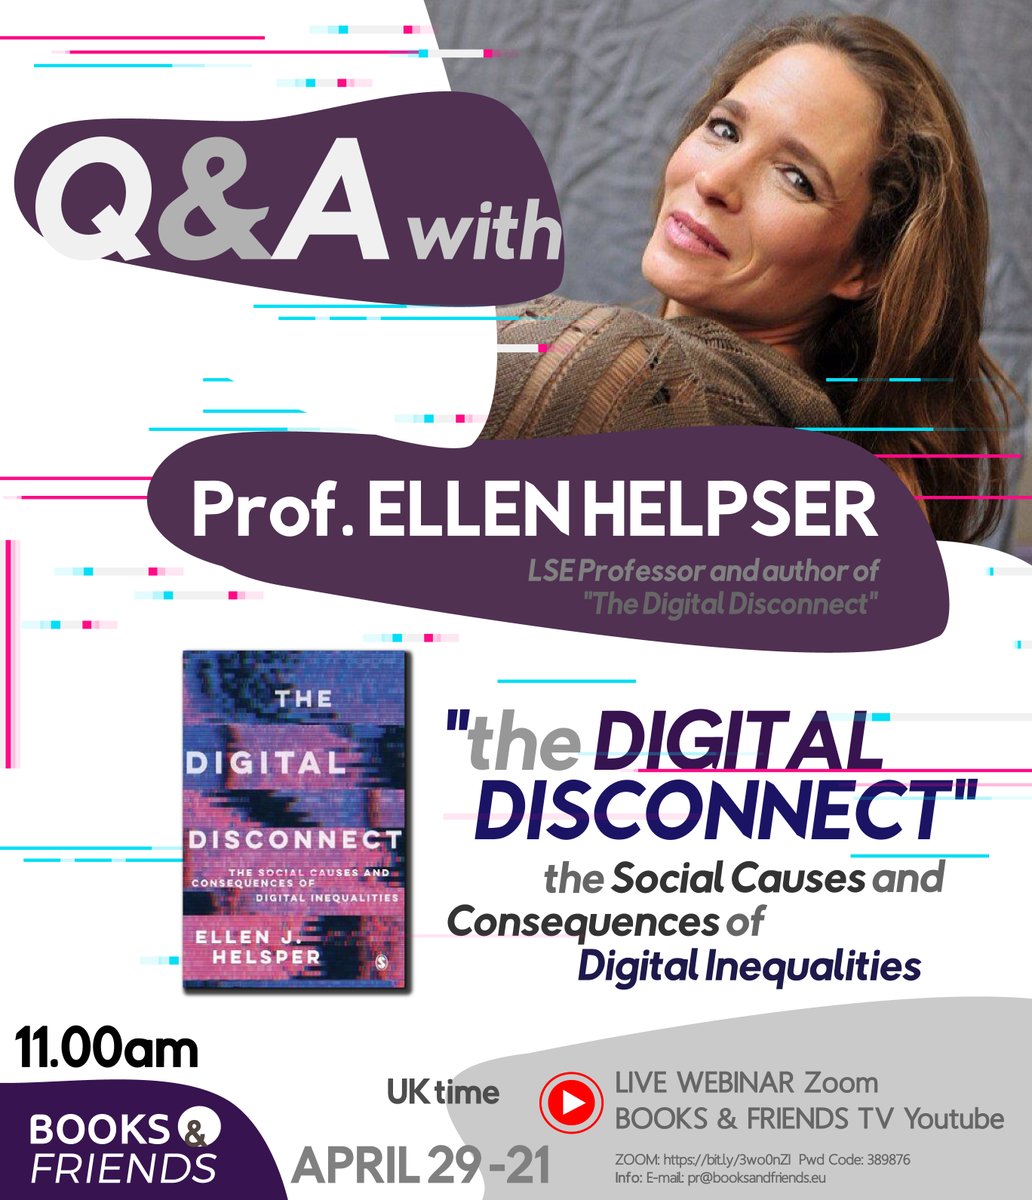 Another live Q&A is coming, guys! 

On April 29th (11am UK time), we will be presenting the new book of Prof. Ellen Helpser @EllenHel, the #DIGITALDISCONNECT, the Social Causes and Consequences of DIGITAL INEQUALITIES'.

Join the conversation!

Get more: bit.ly/3cTcMwU